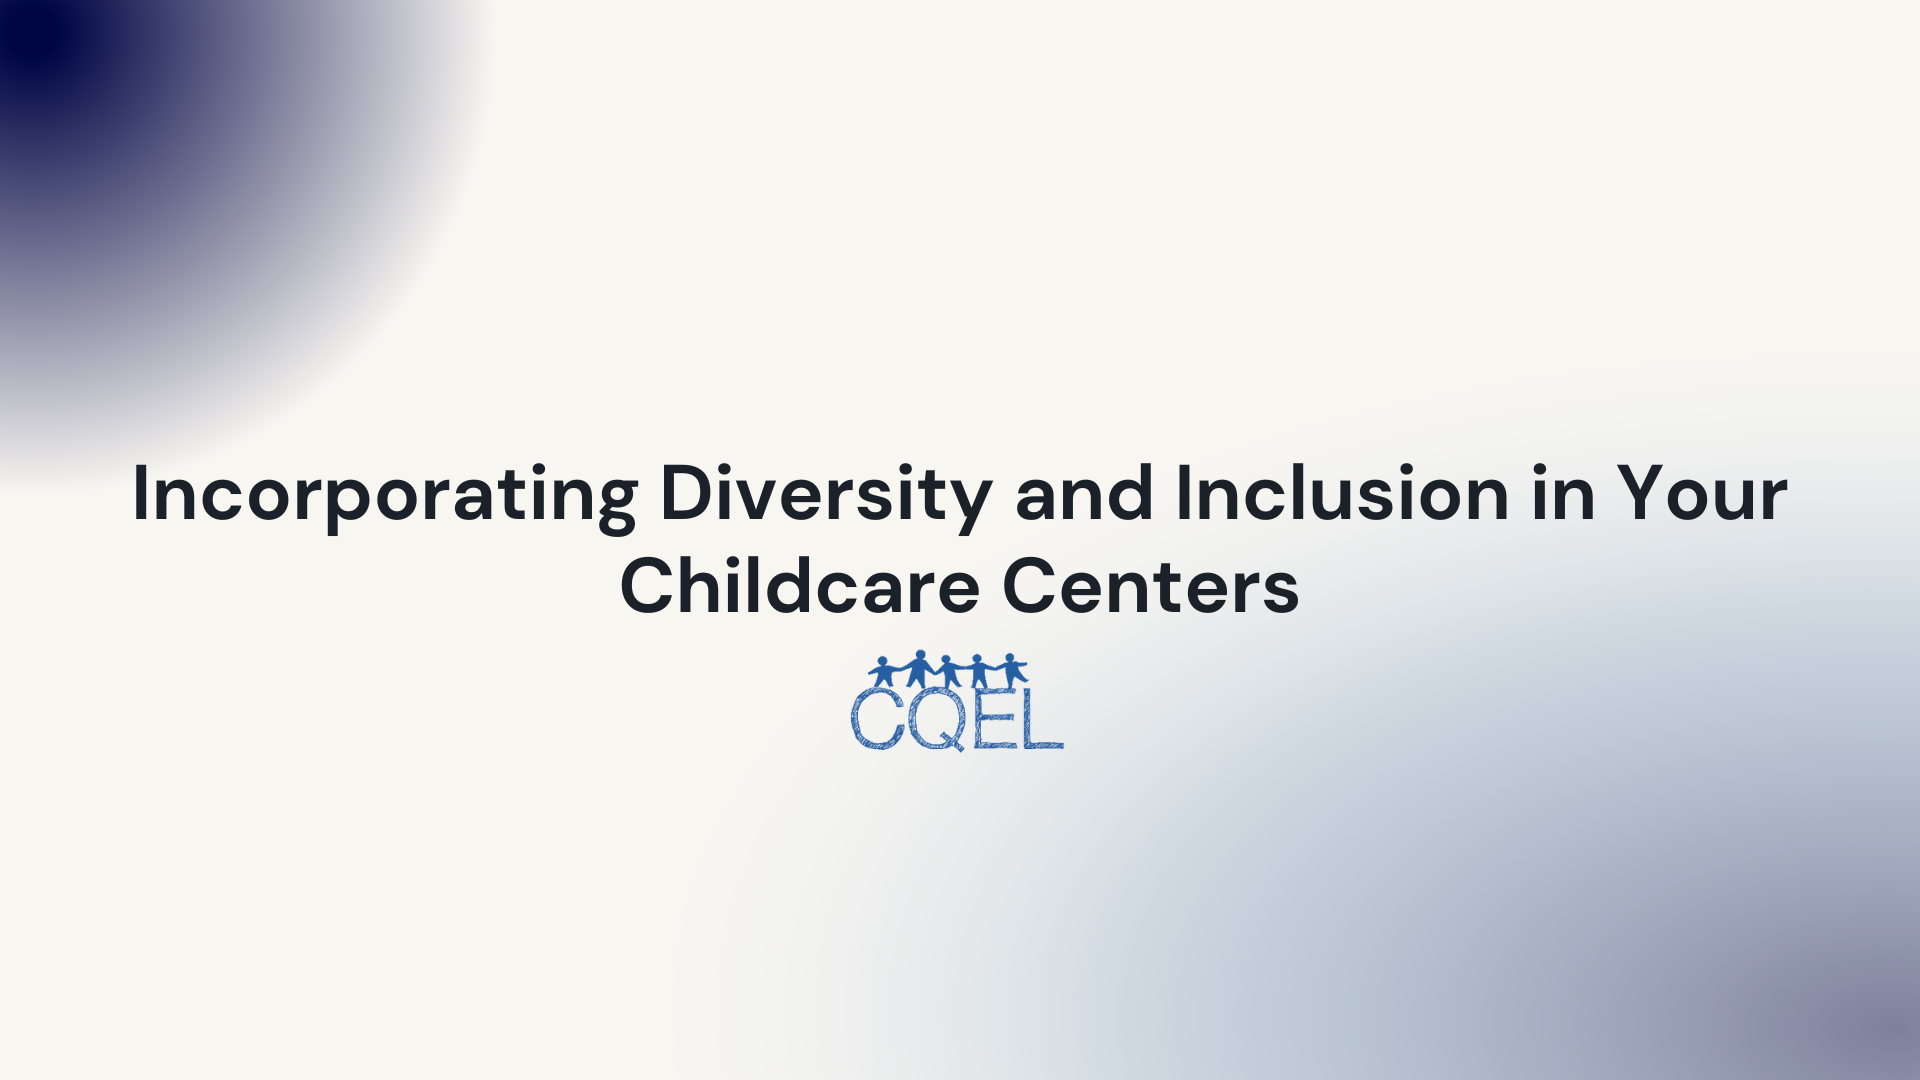 Incorporating Diversity and Inclusion in Your Childcare Centers